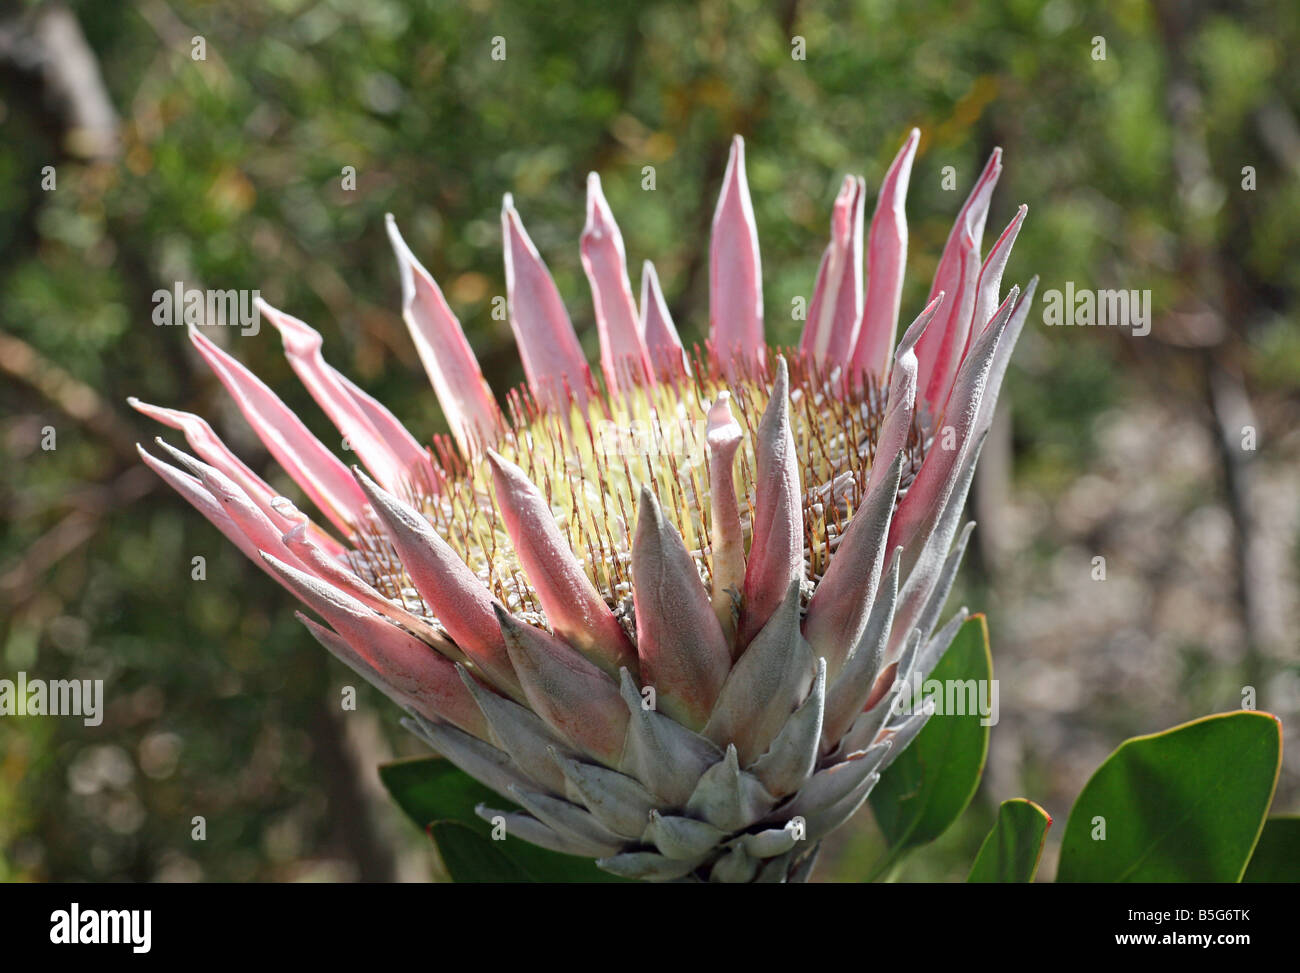 The King Protea (Protea cynaroides) is a flowering plant. It is a distinctive Protea, having the largest flower head Stock Photo